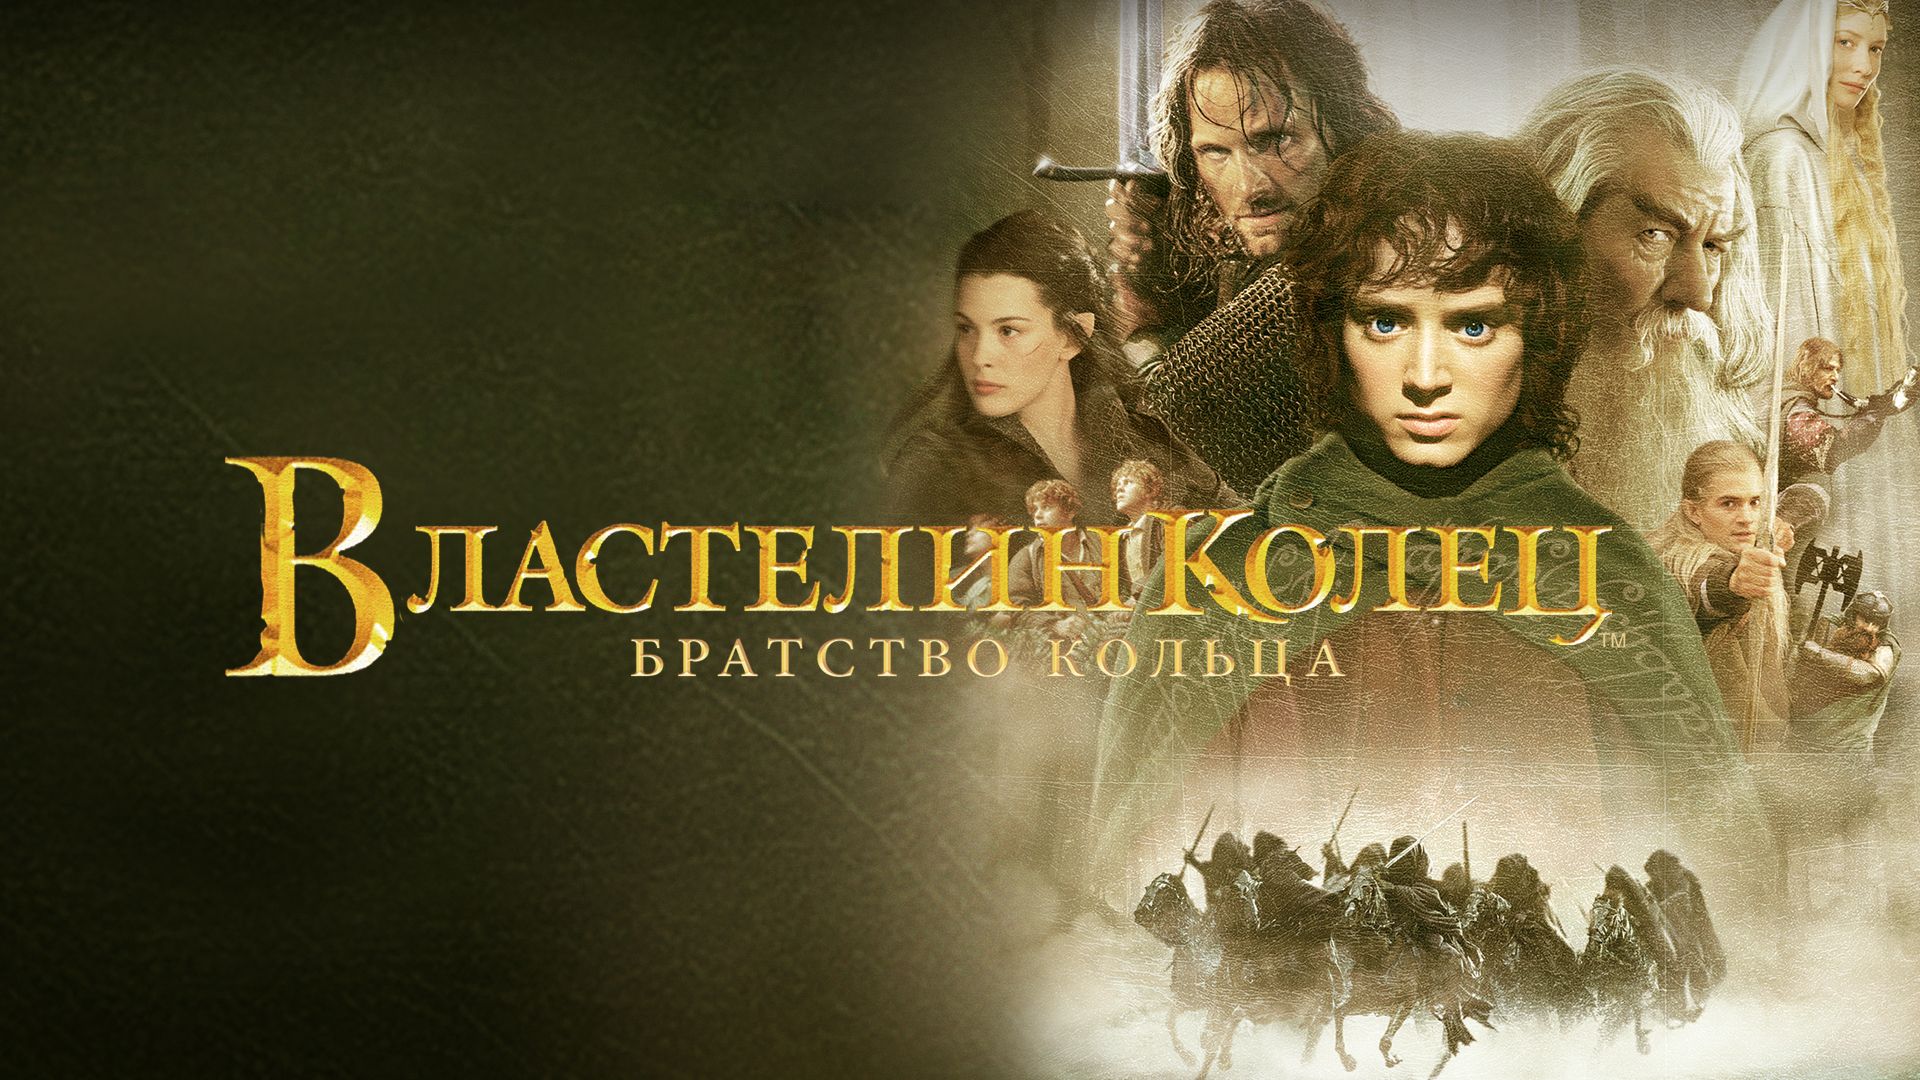 Властелин колец: Братство Кольца | The Lord of the Rings: The Fellowship of the Ring (2001)